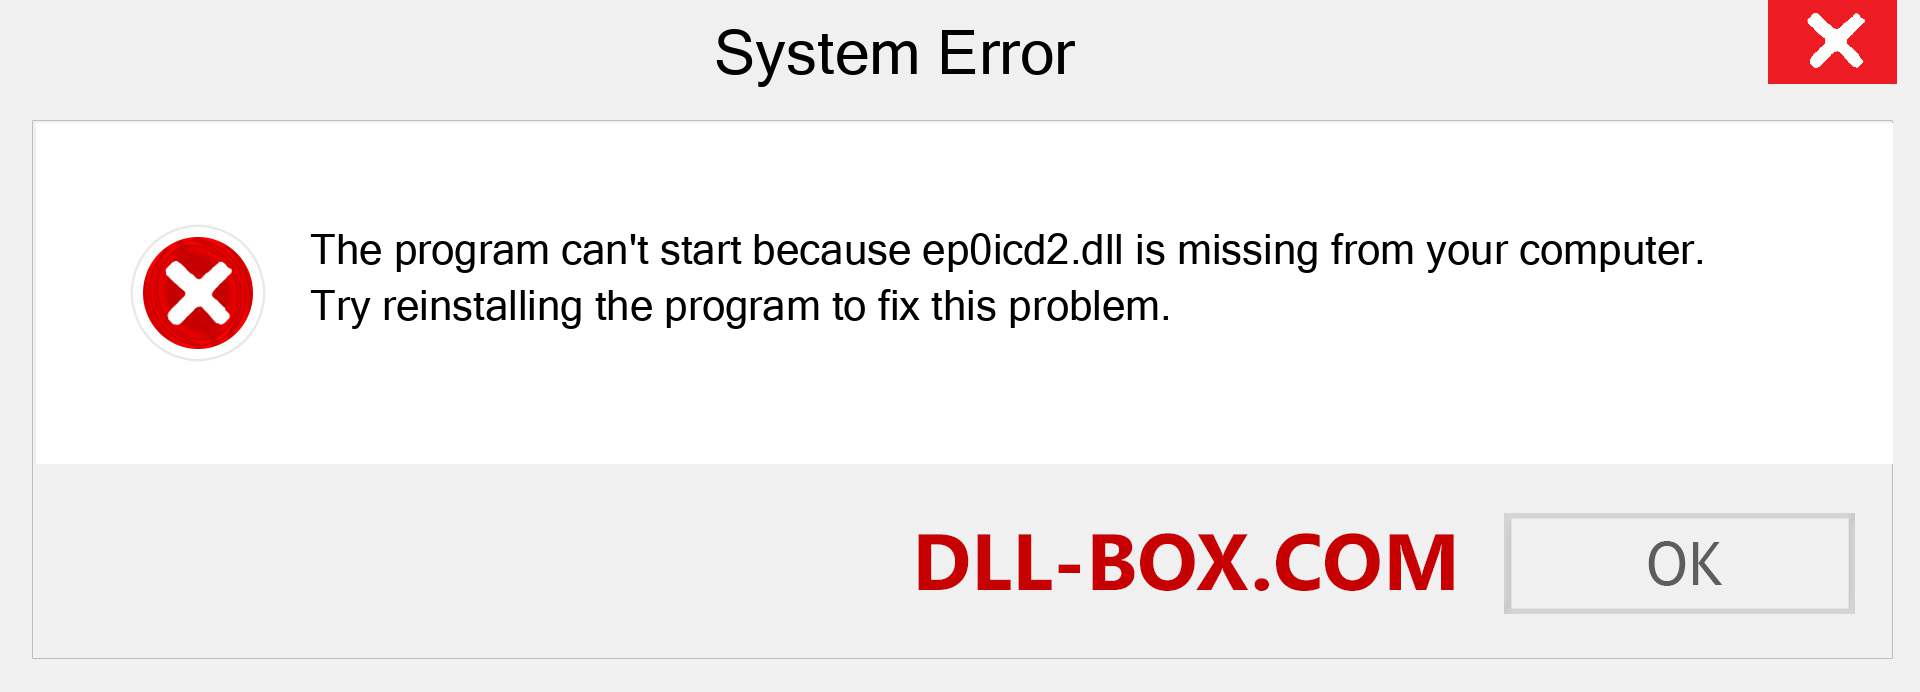  ep0icd2.dll file is missing?. Download for Windows 7, 8, 10 - Fix  ep0icd2 dll Missing Error on Windows, photos, images